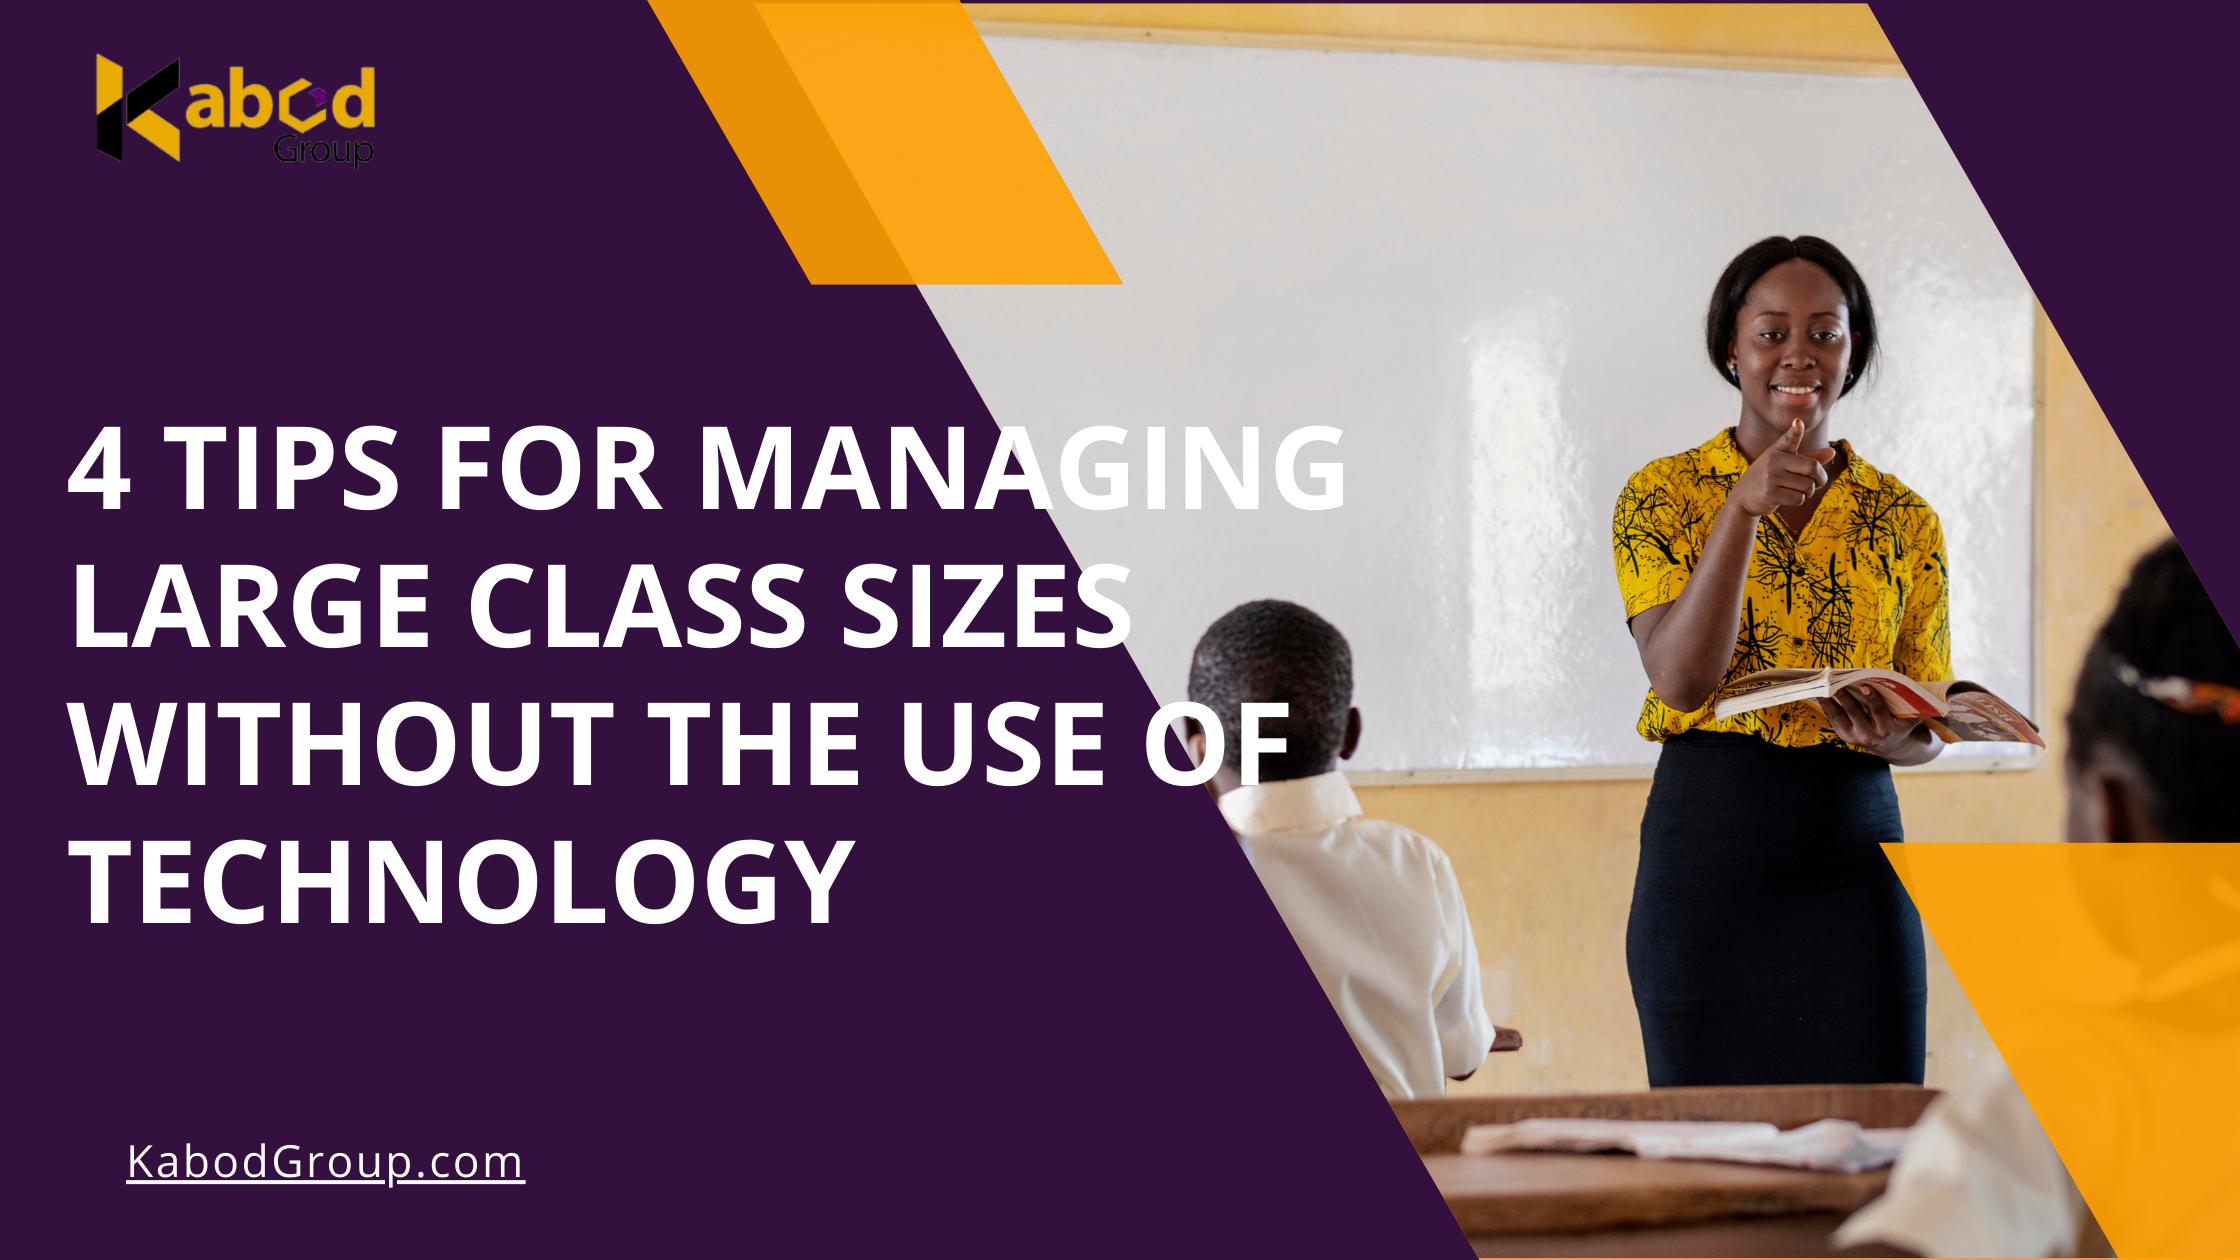 4 tips for managing large class sizes without the use of technology